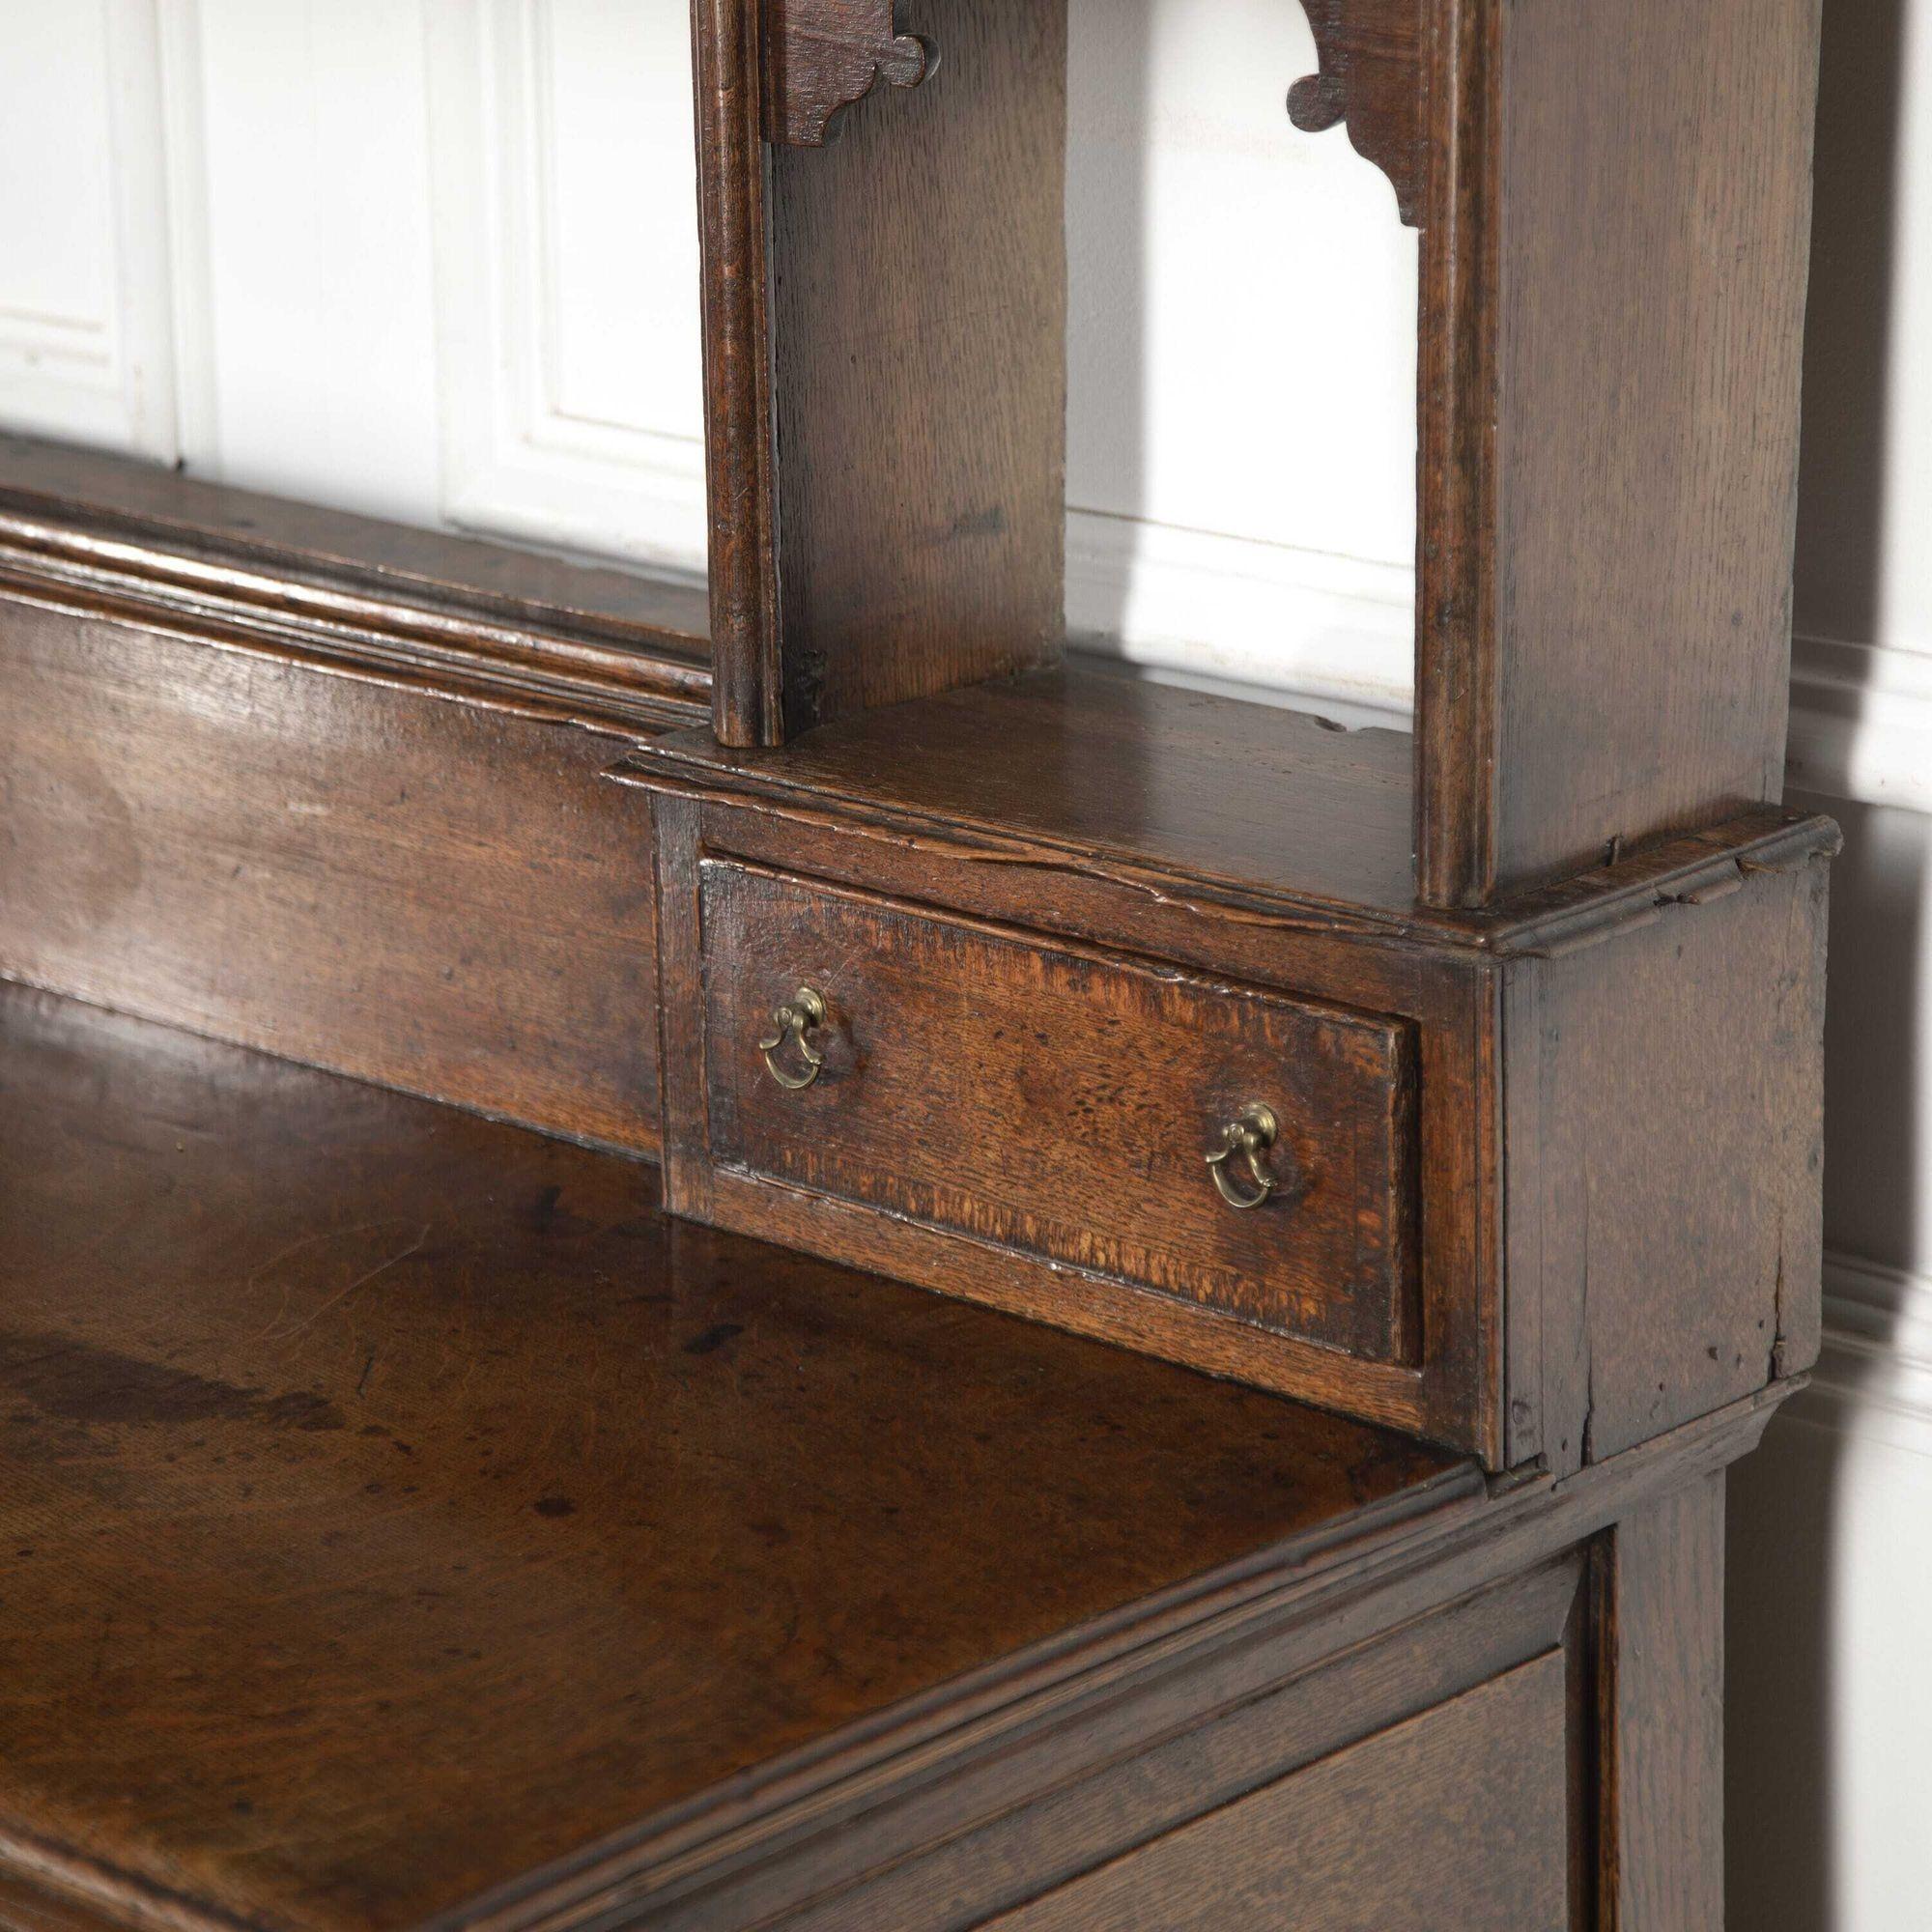 Wonderful 18th Century oak dresser.
The size of this oak dresser is wonderful and the colour and form of this dresser are just as fantastic. It is very well proportioned, having a moulded cornice on the top of two shelved plate racks. The base has